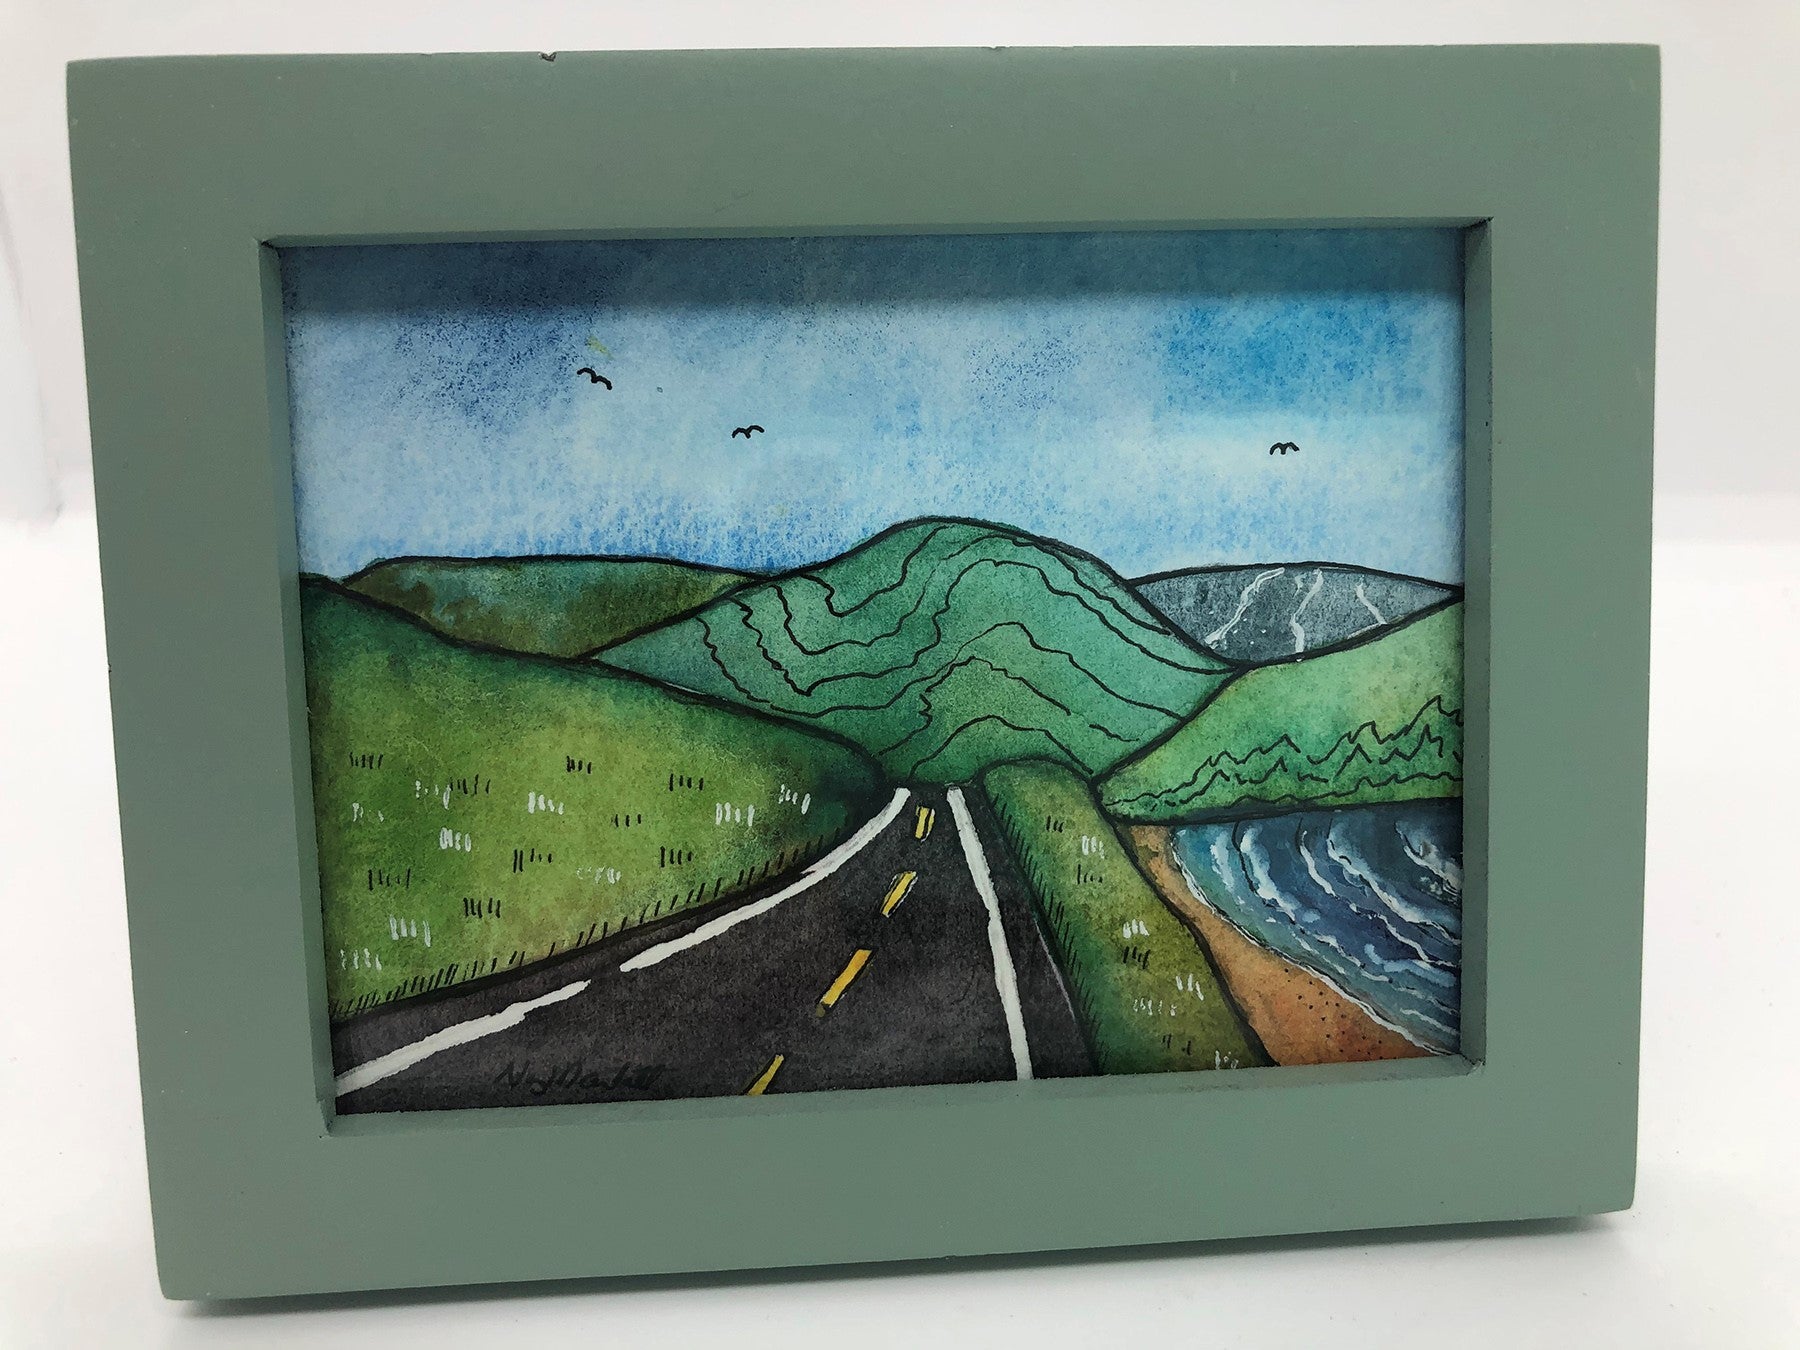 Yellowstone Lake memories in this original, framed, hand painted, watercolor with ink, on professional grade watercolor paper. Gift box, tissue paper, and ribbon for your gift giving included. Small originals for smalls paces, bring Wyoming's beauty into your home.